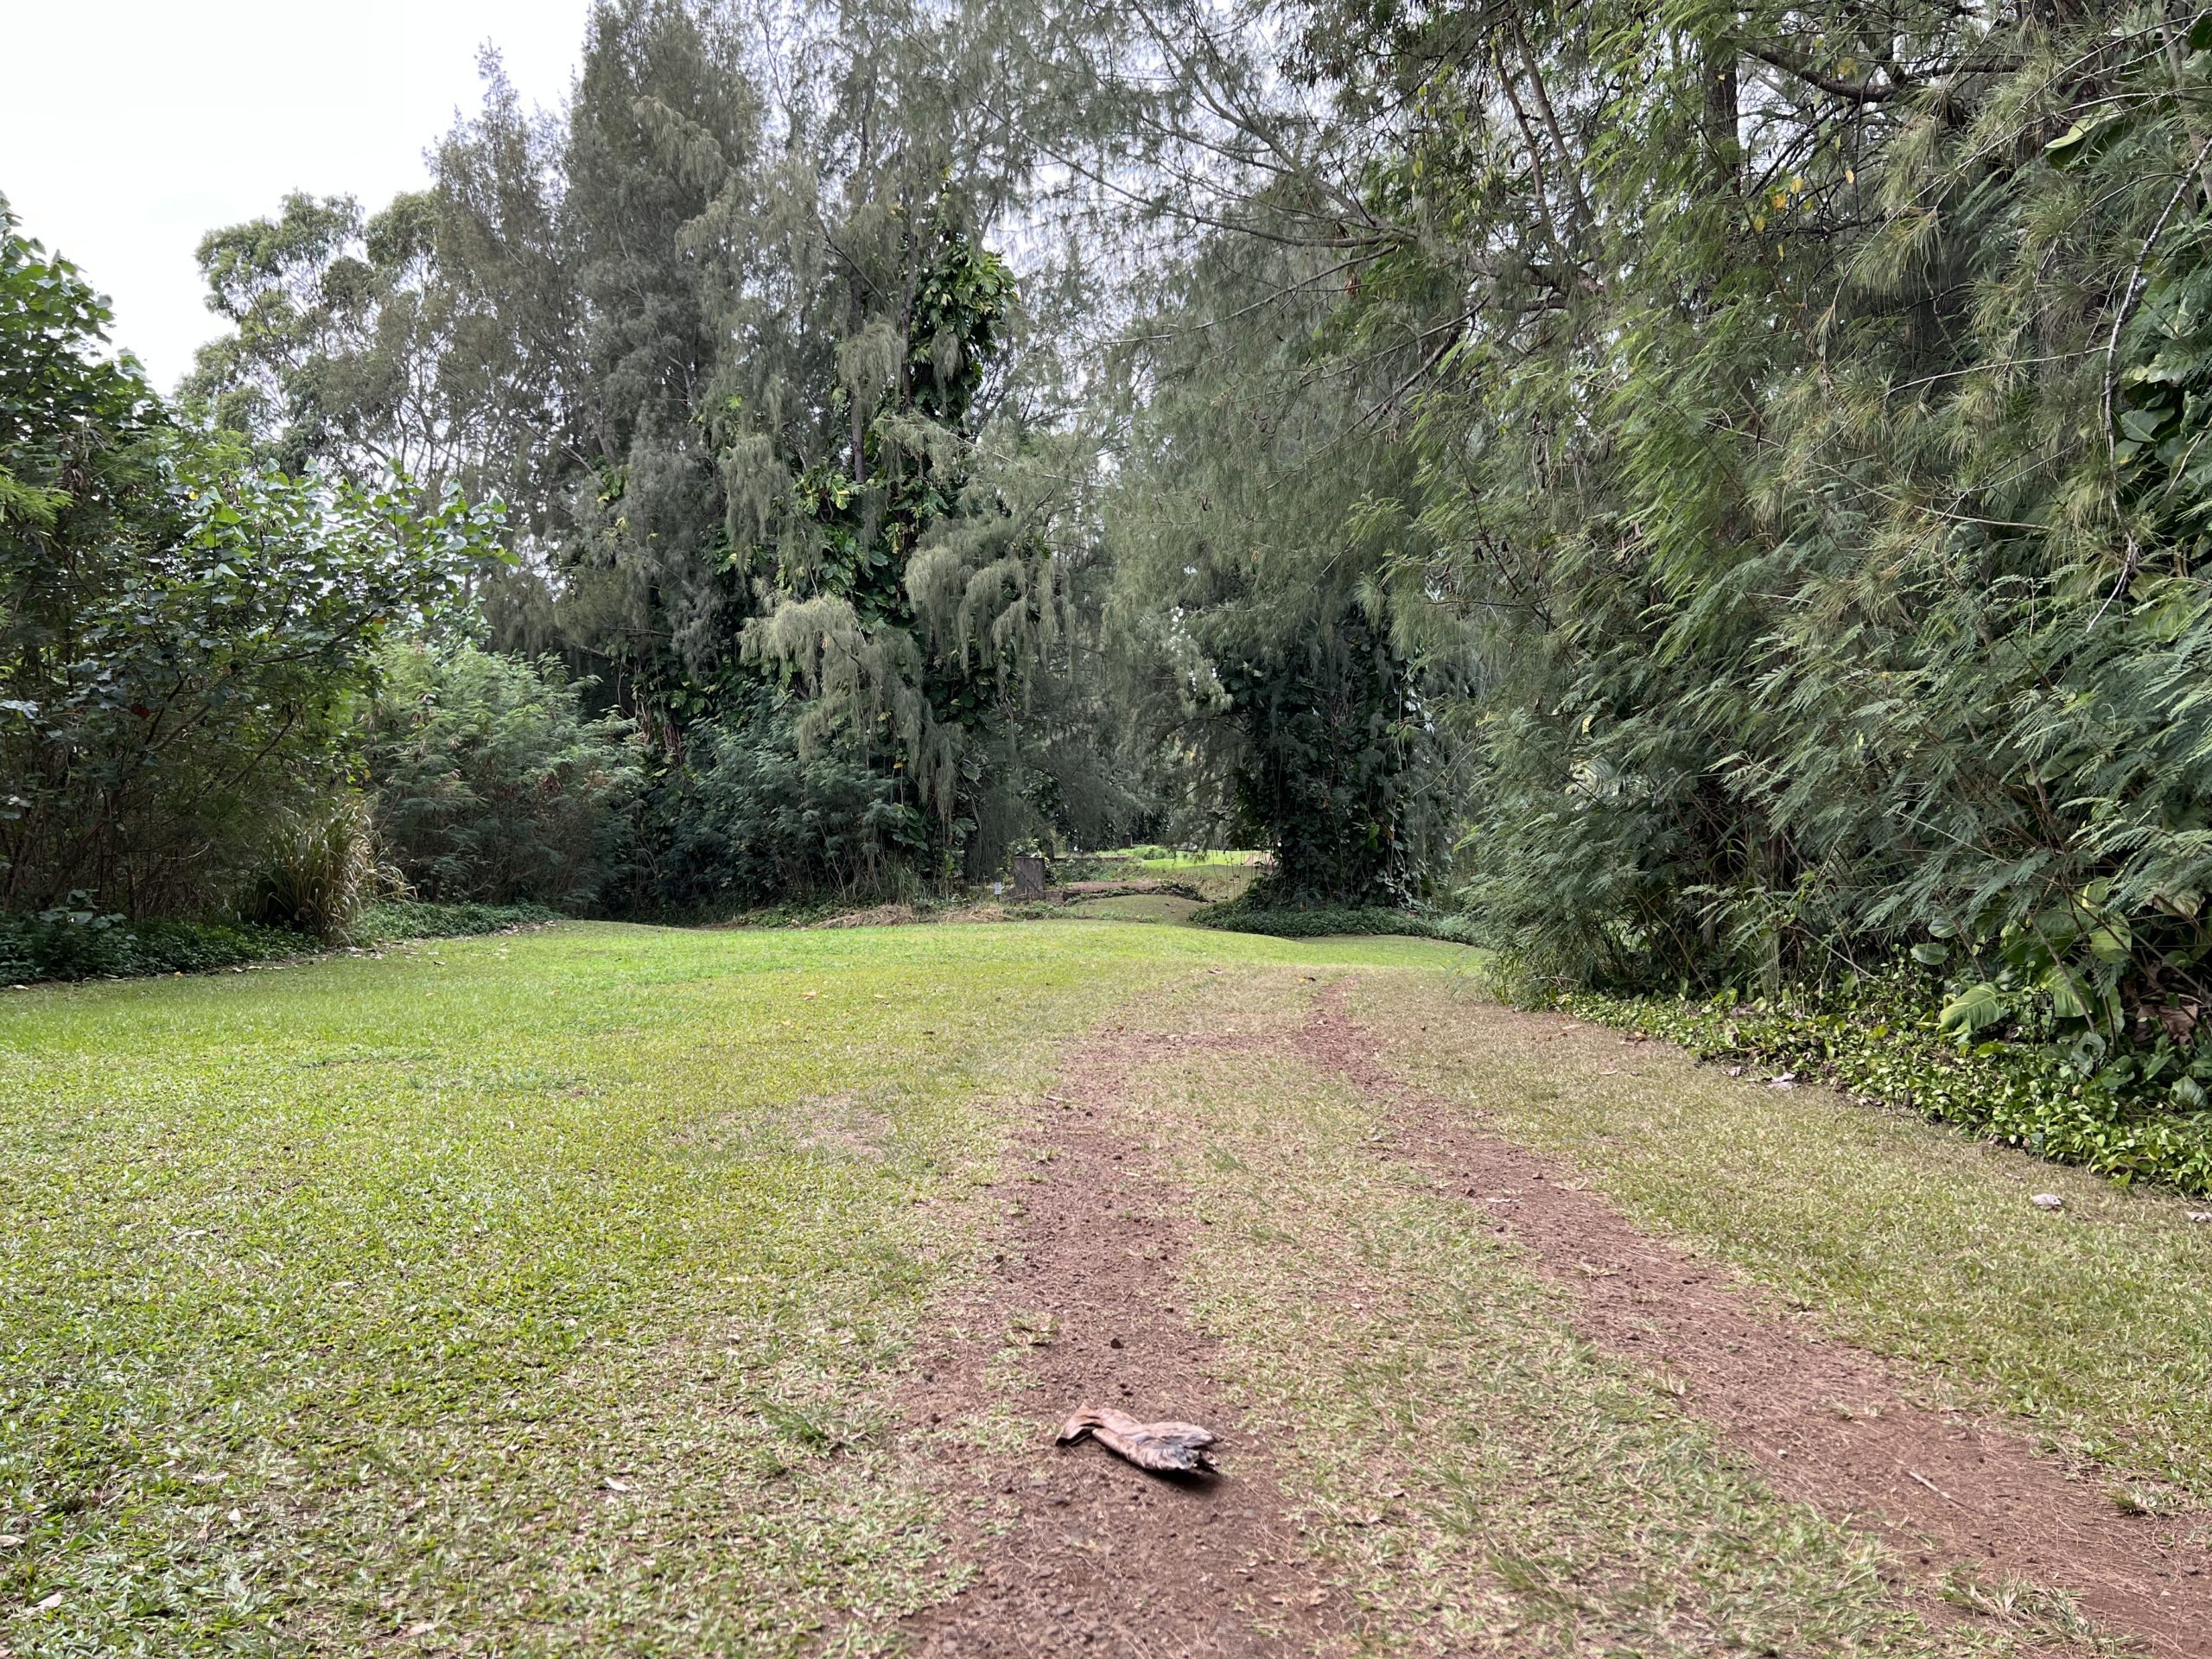 a dirt path with trees and grass